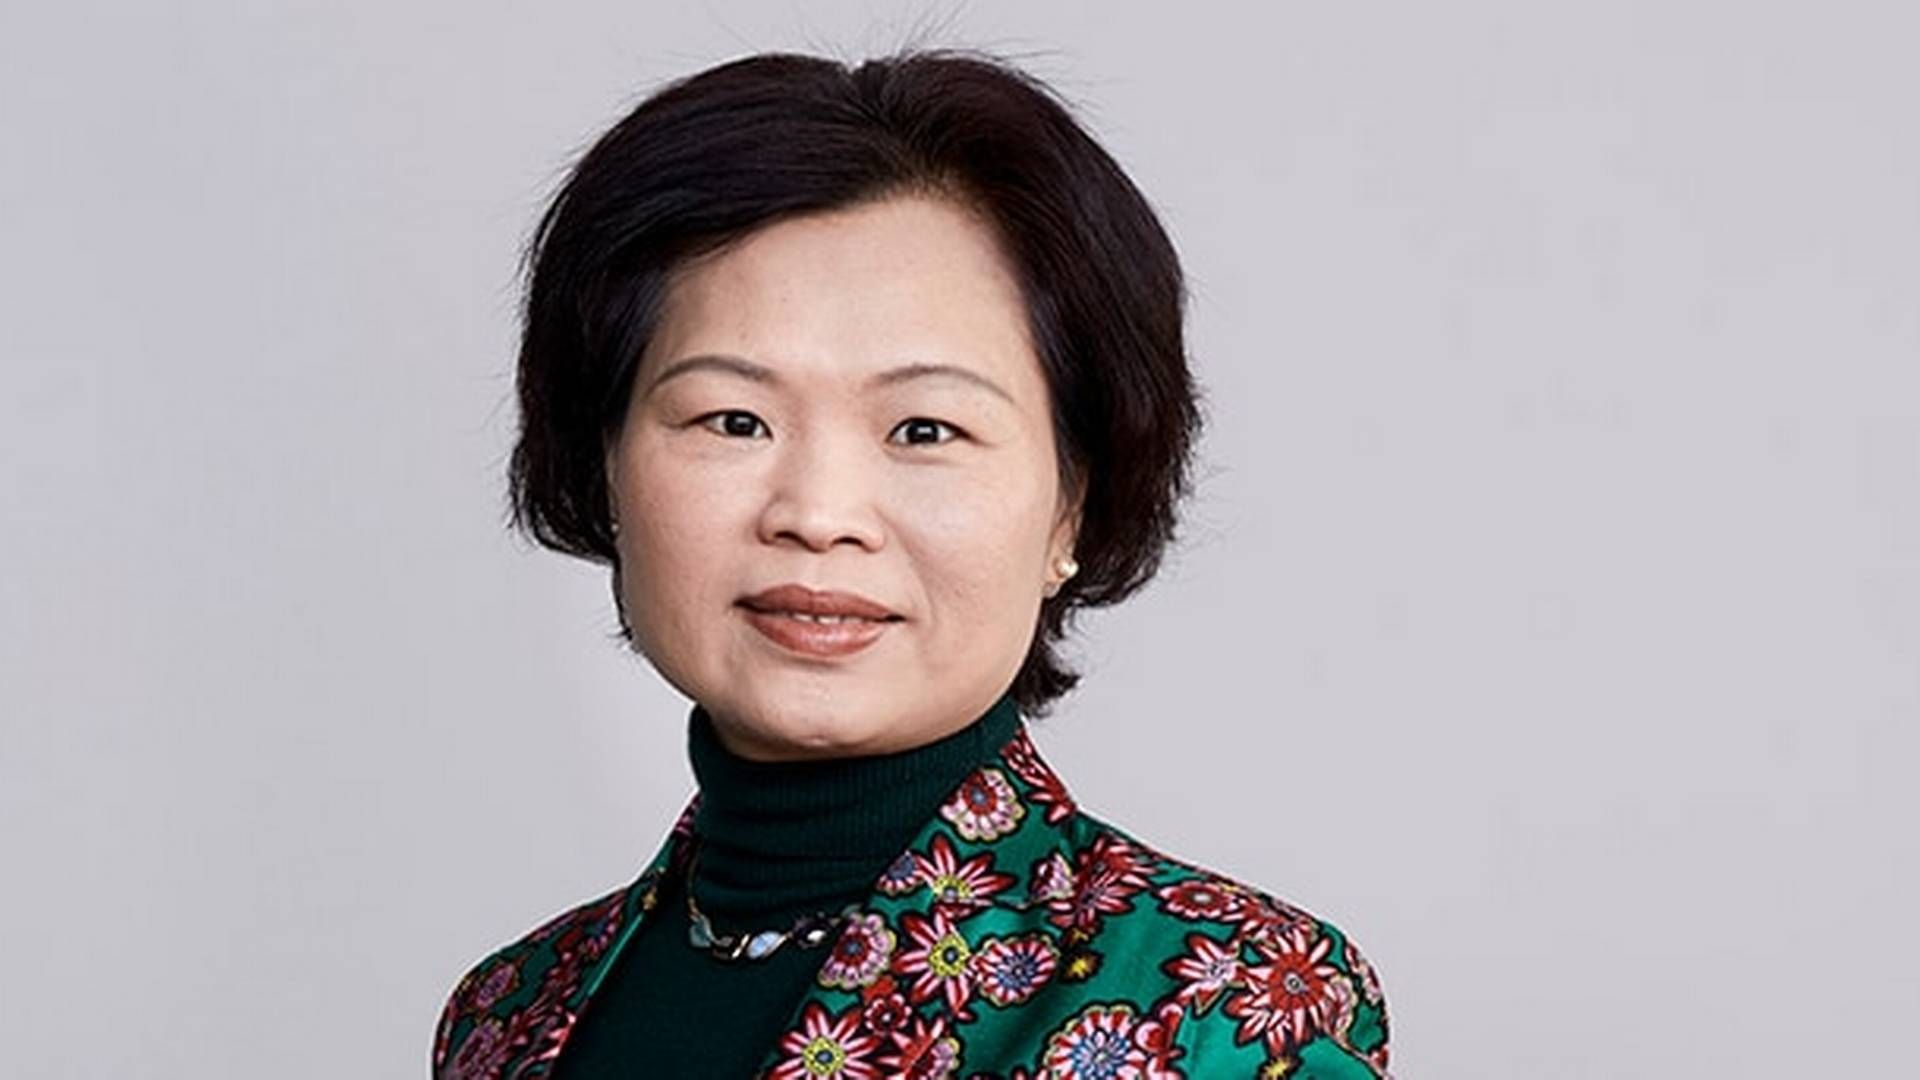 Silvia Ding has been working at Maersk since 1999. | Photo: Pr/mærsk